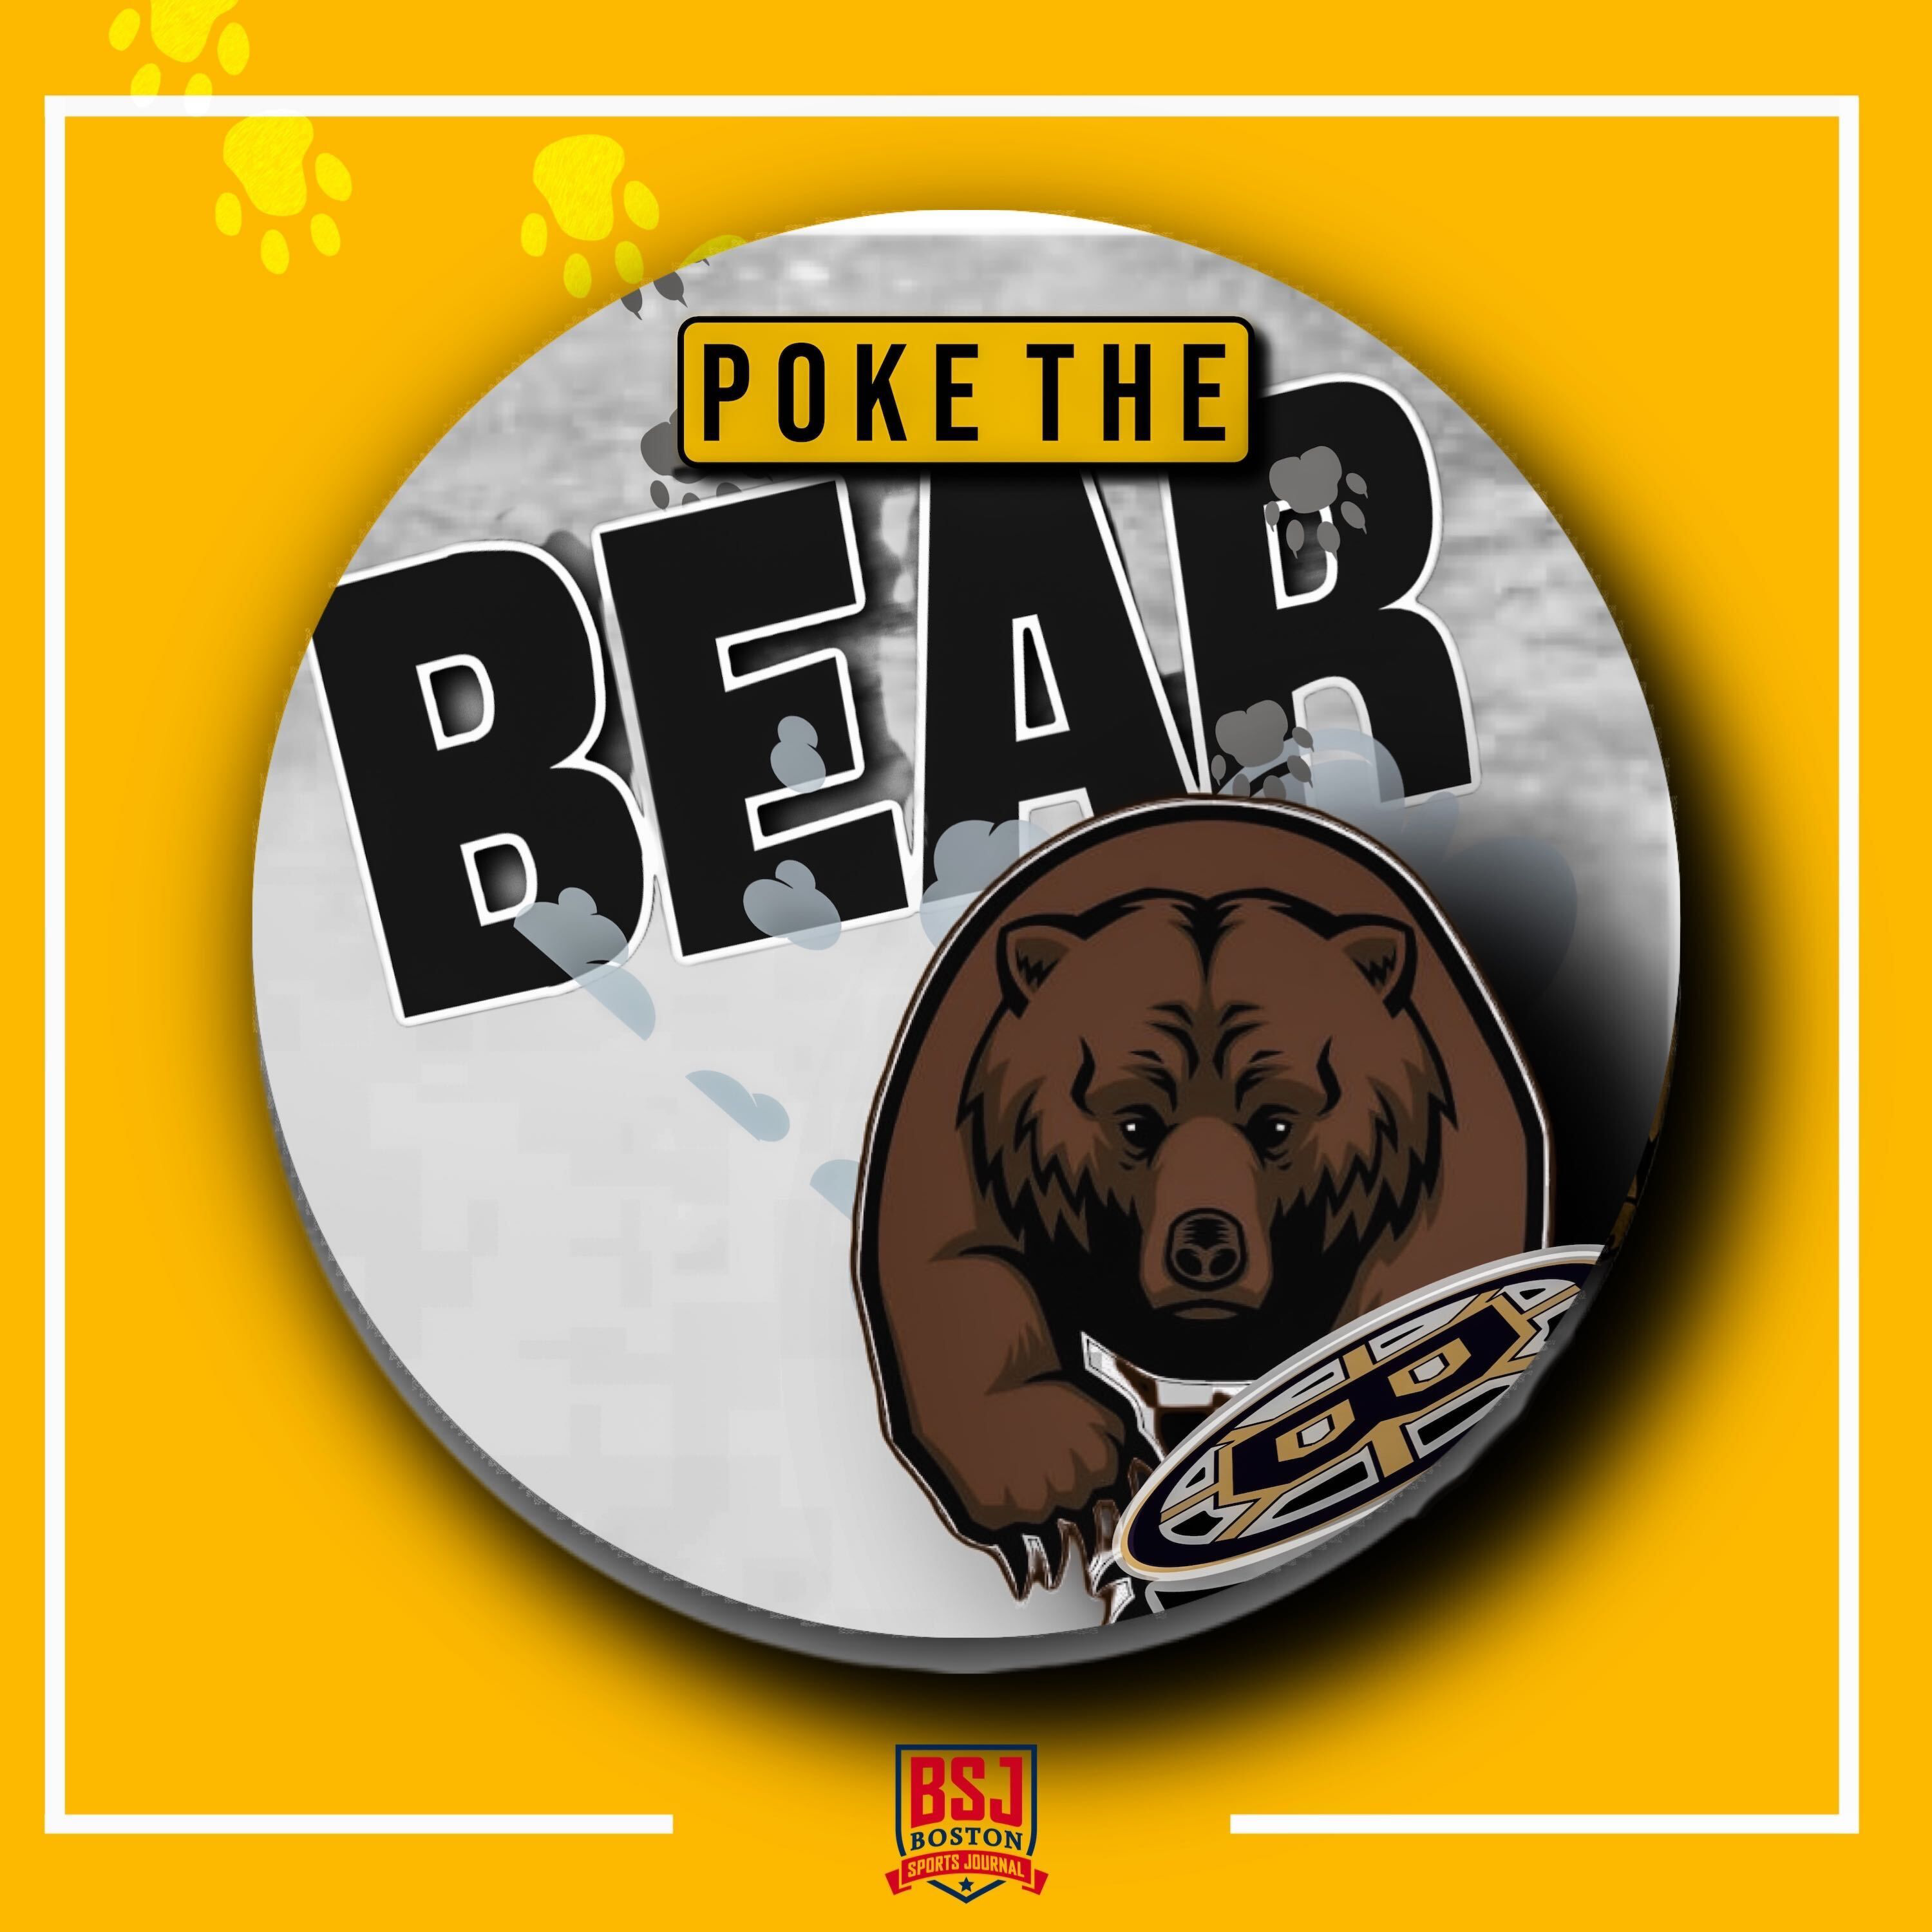 A highlight from Whats the Hold-Up On the Bruins Bringing Back Patrice Bergeron and David Krejci? | Poke the Bear w/ Conor Ryan